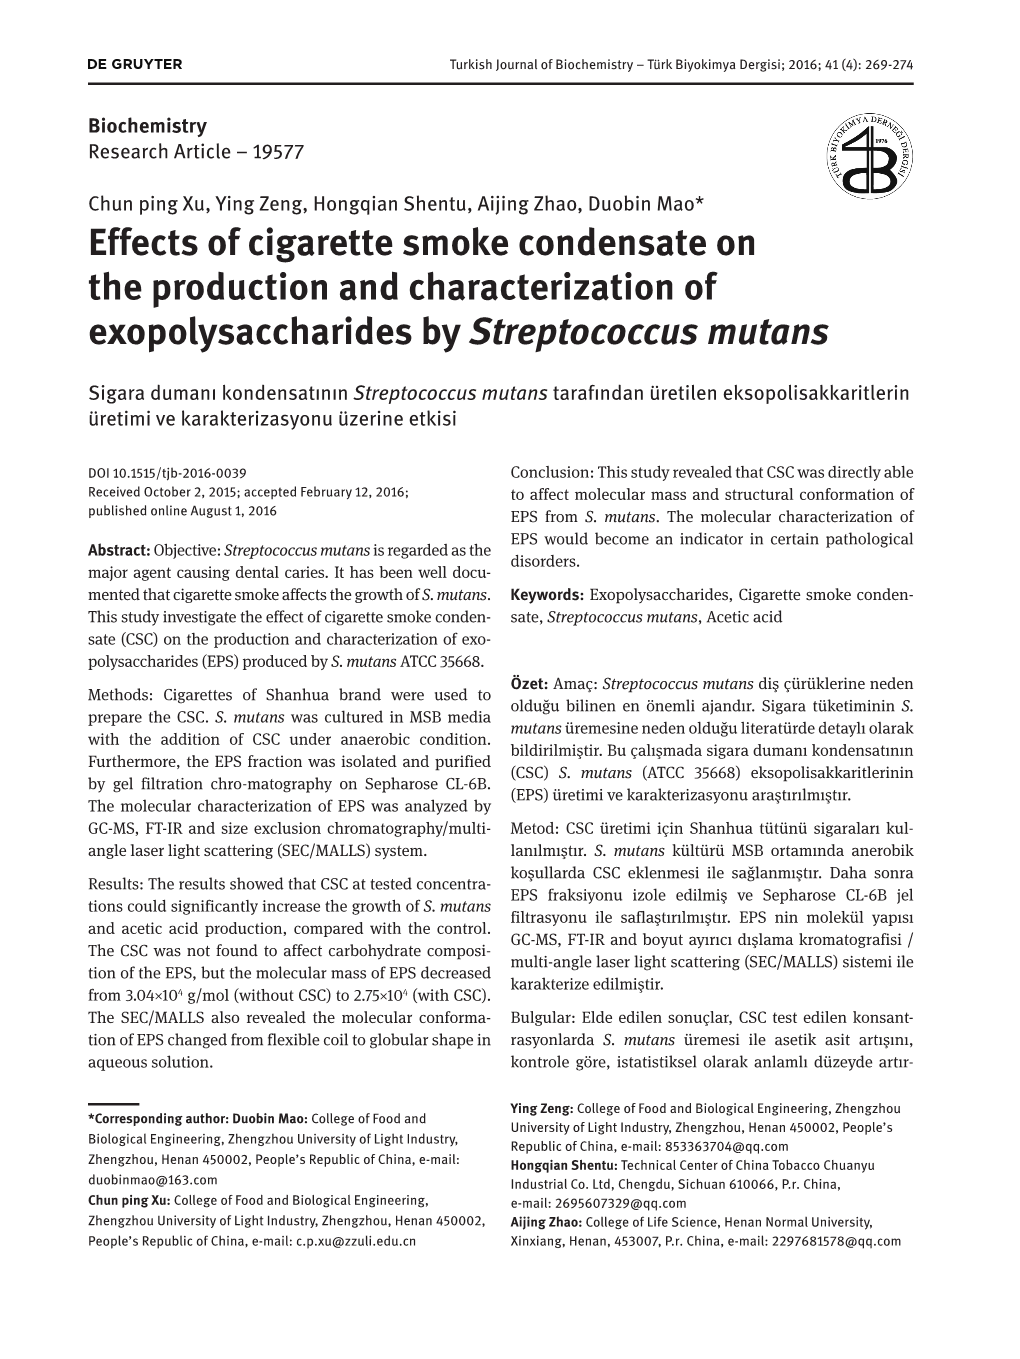 Effects of Cigarette Smoke Condensate on the Production and Characterization of Exopolysaccharides by Streptococcus Mutans